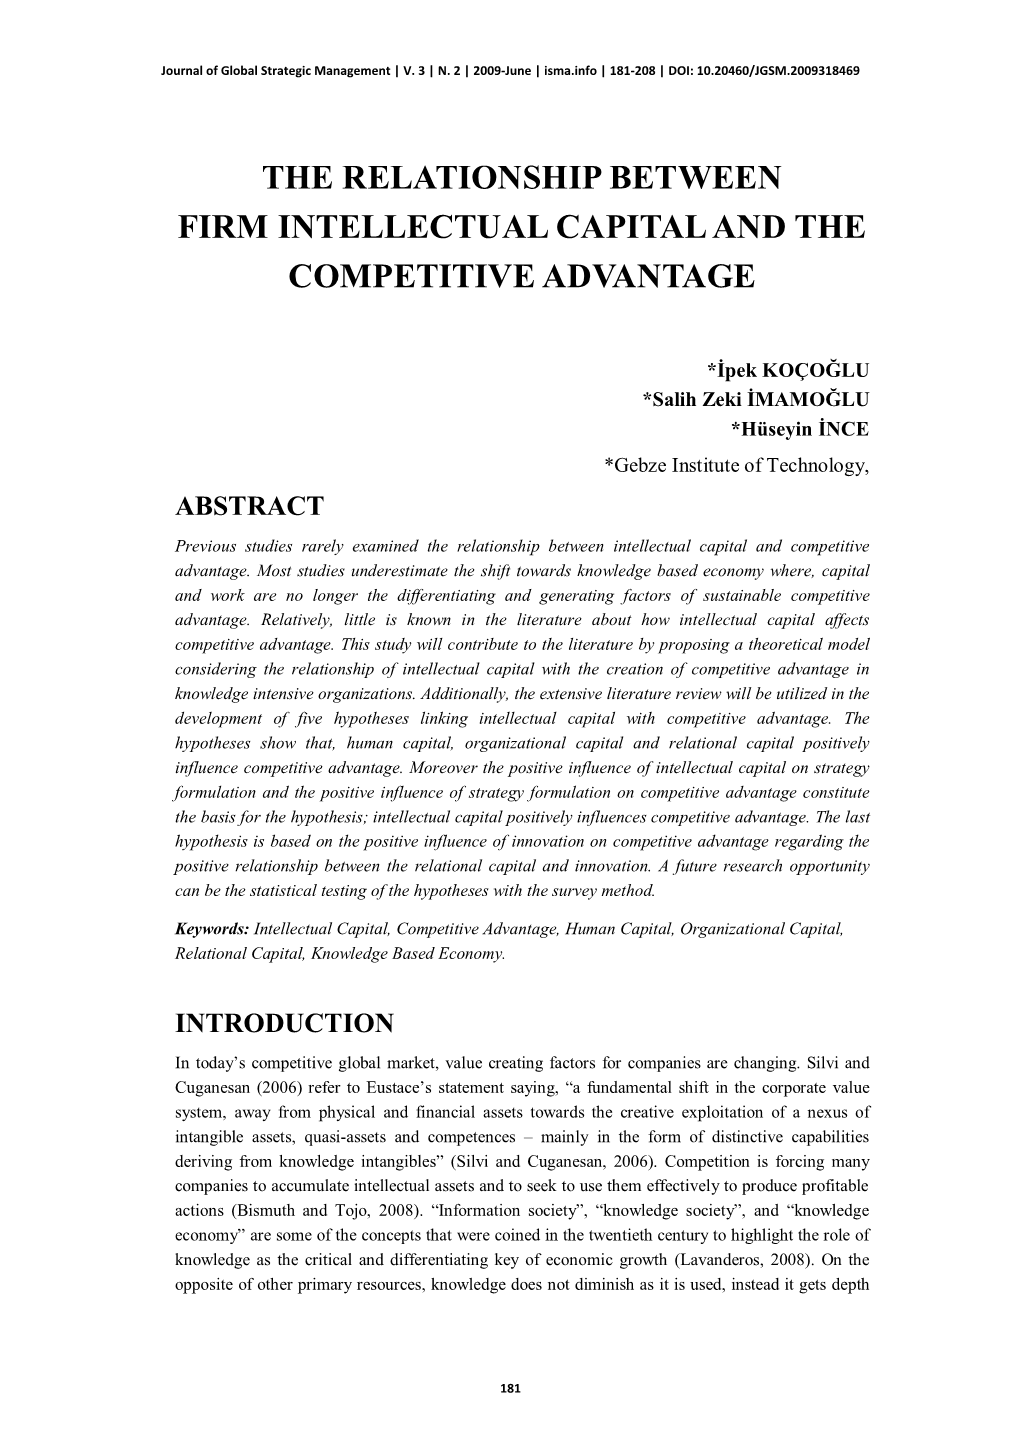 The Relationship Between Firm Intellectual Capital and the Competitive Advantage